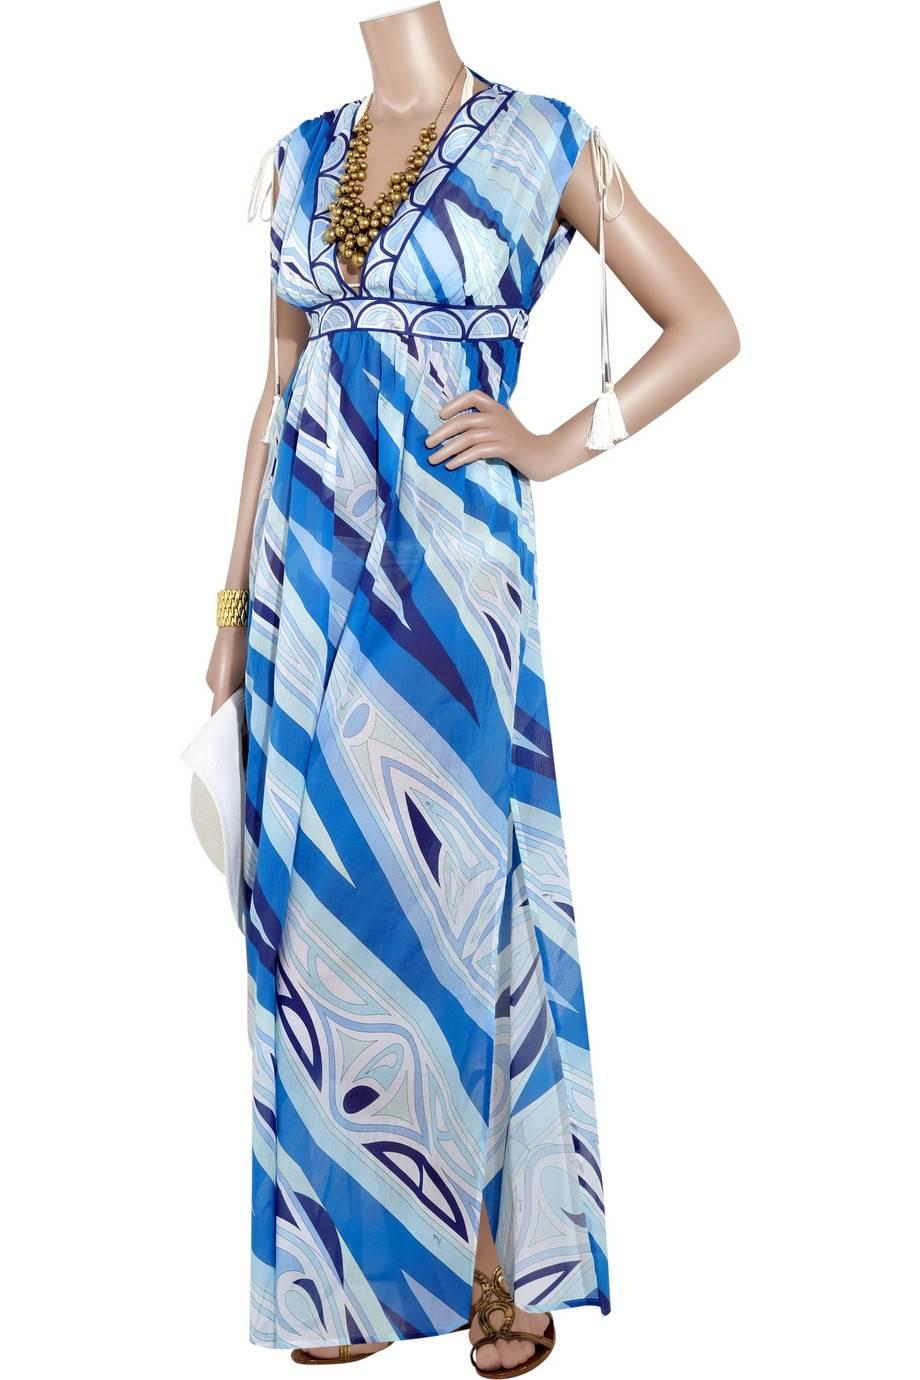 BEAUTIFUL 

EMILIO PUCCI SIGNATURE PRINT DRESS 

A timeless EMILIO PUCCI piece that will never go out of style!

DETAILS:
Stunning EMILIO PUCCI signature piece
Beautiful print in vibrant blue colors with 